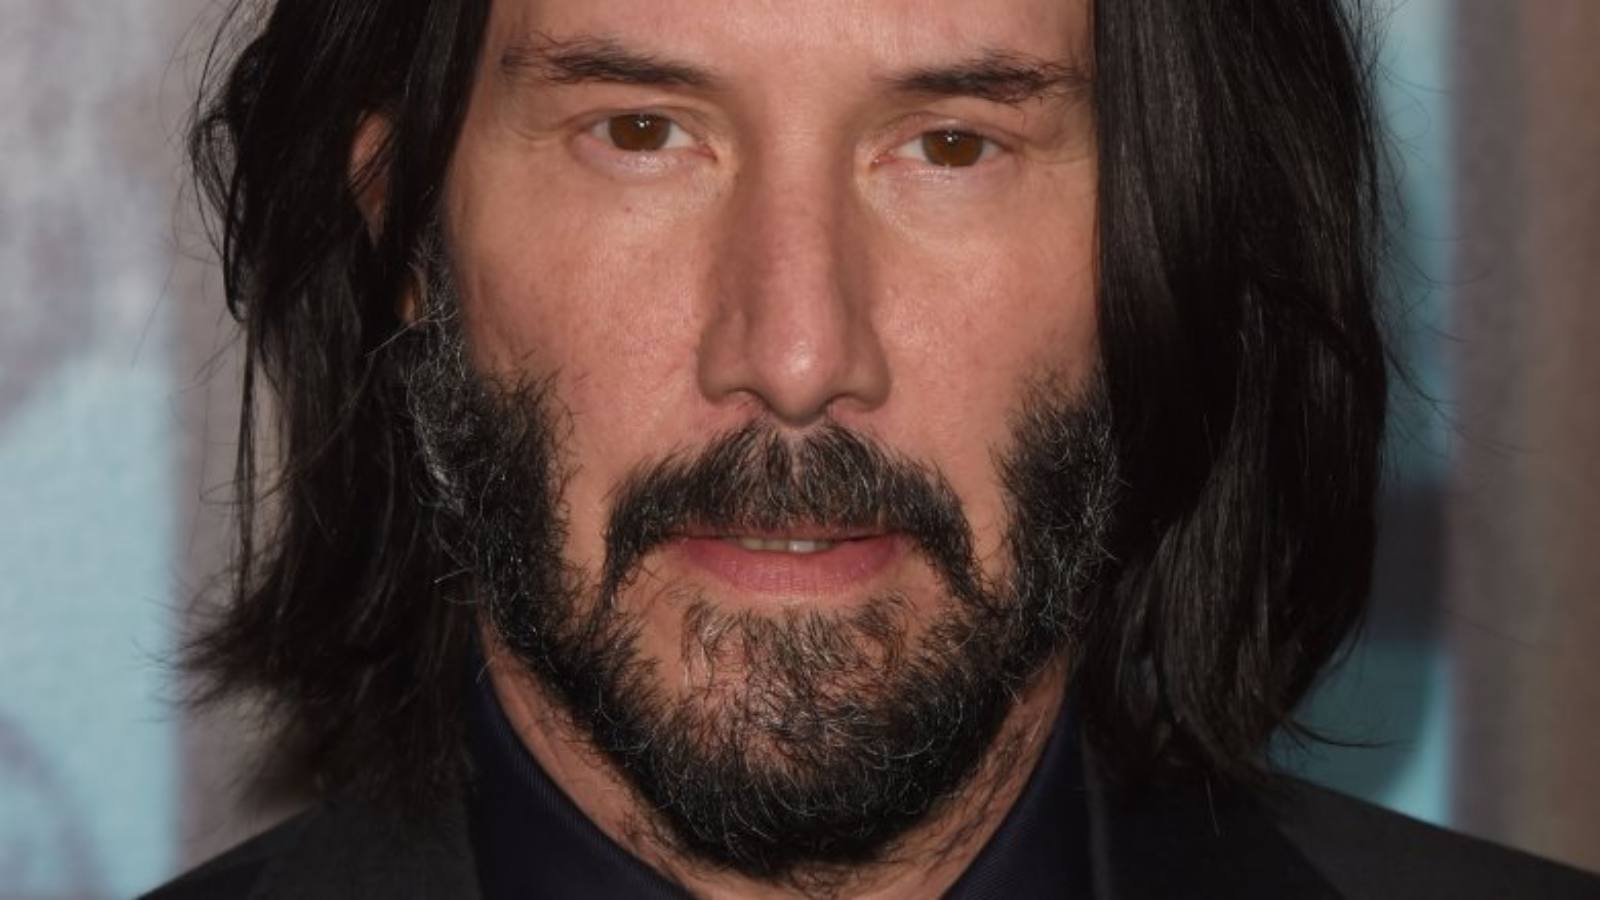 Keanu Reeves' father left him and the family